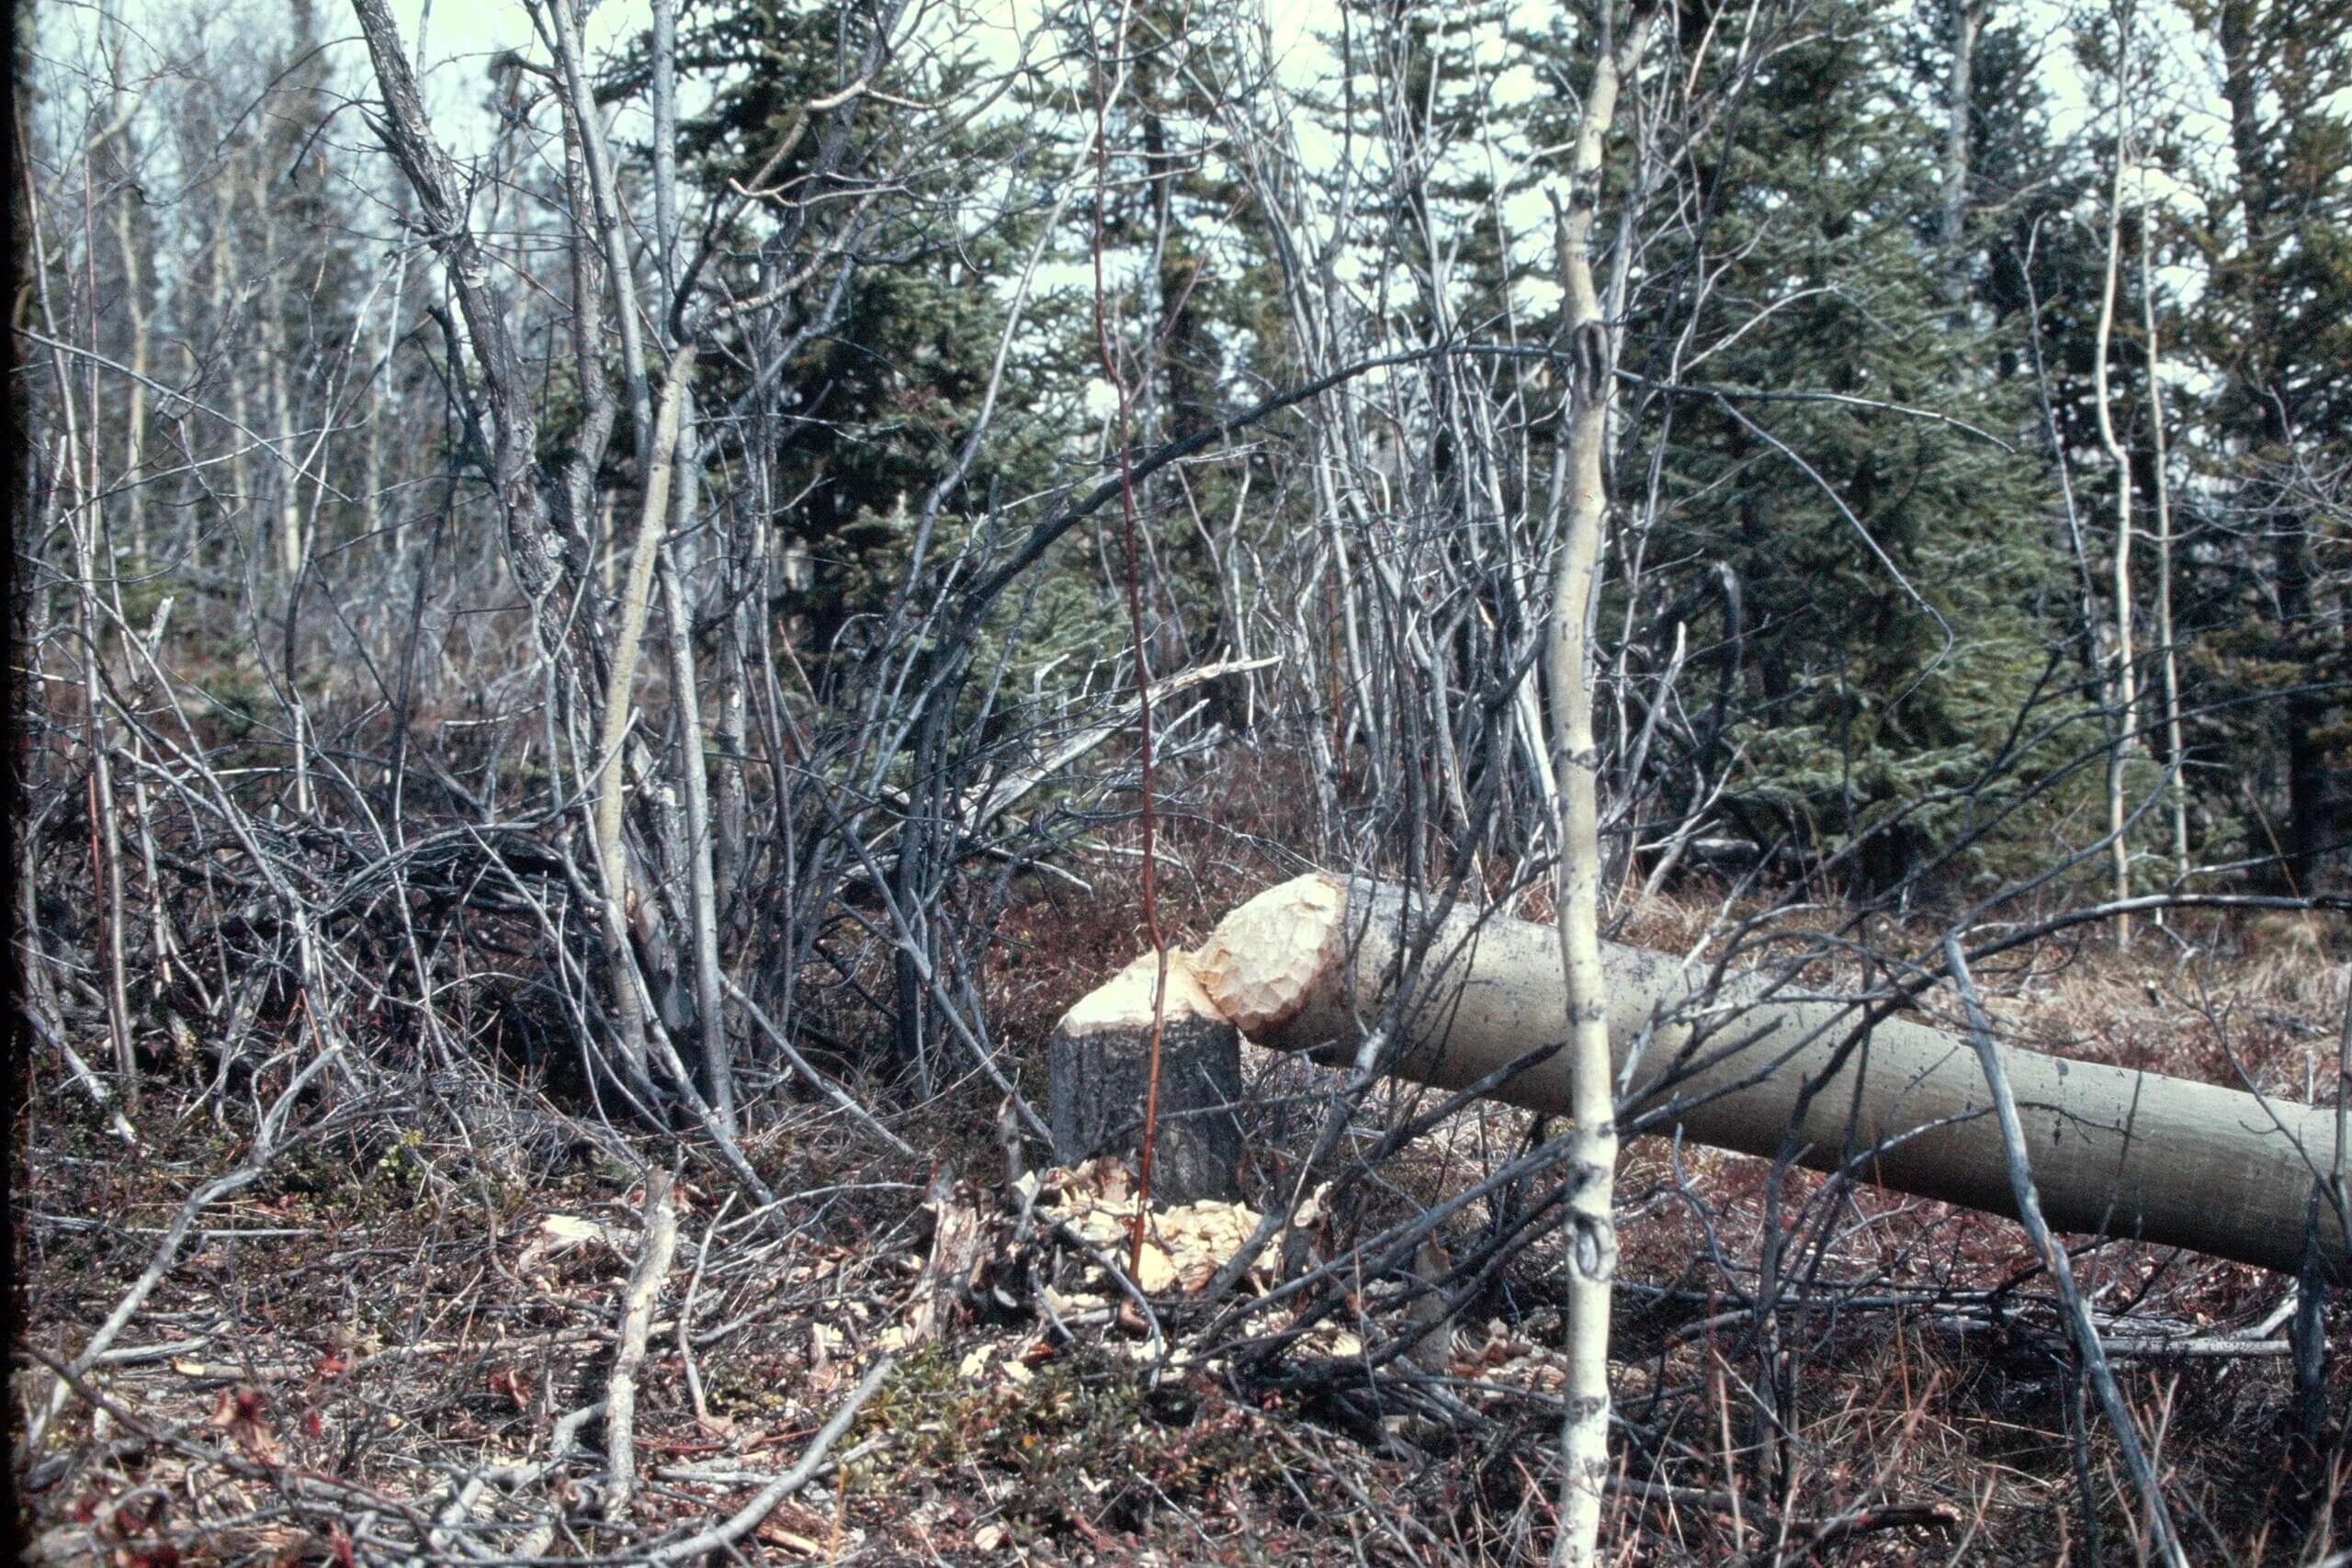 Sign of beaver activity